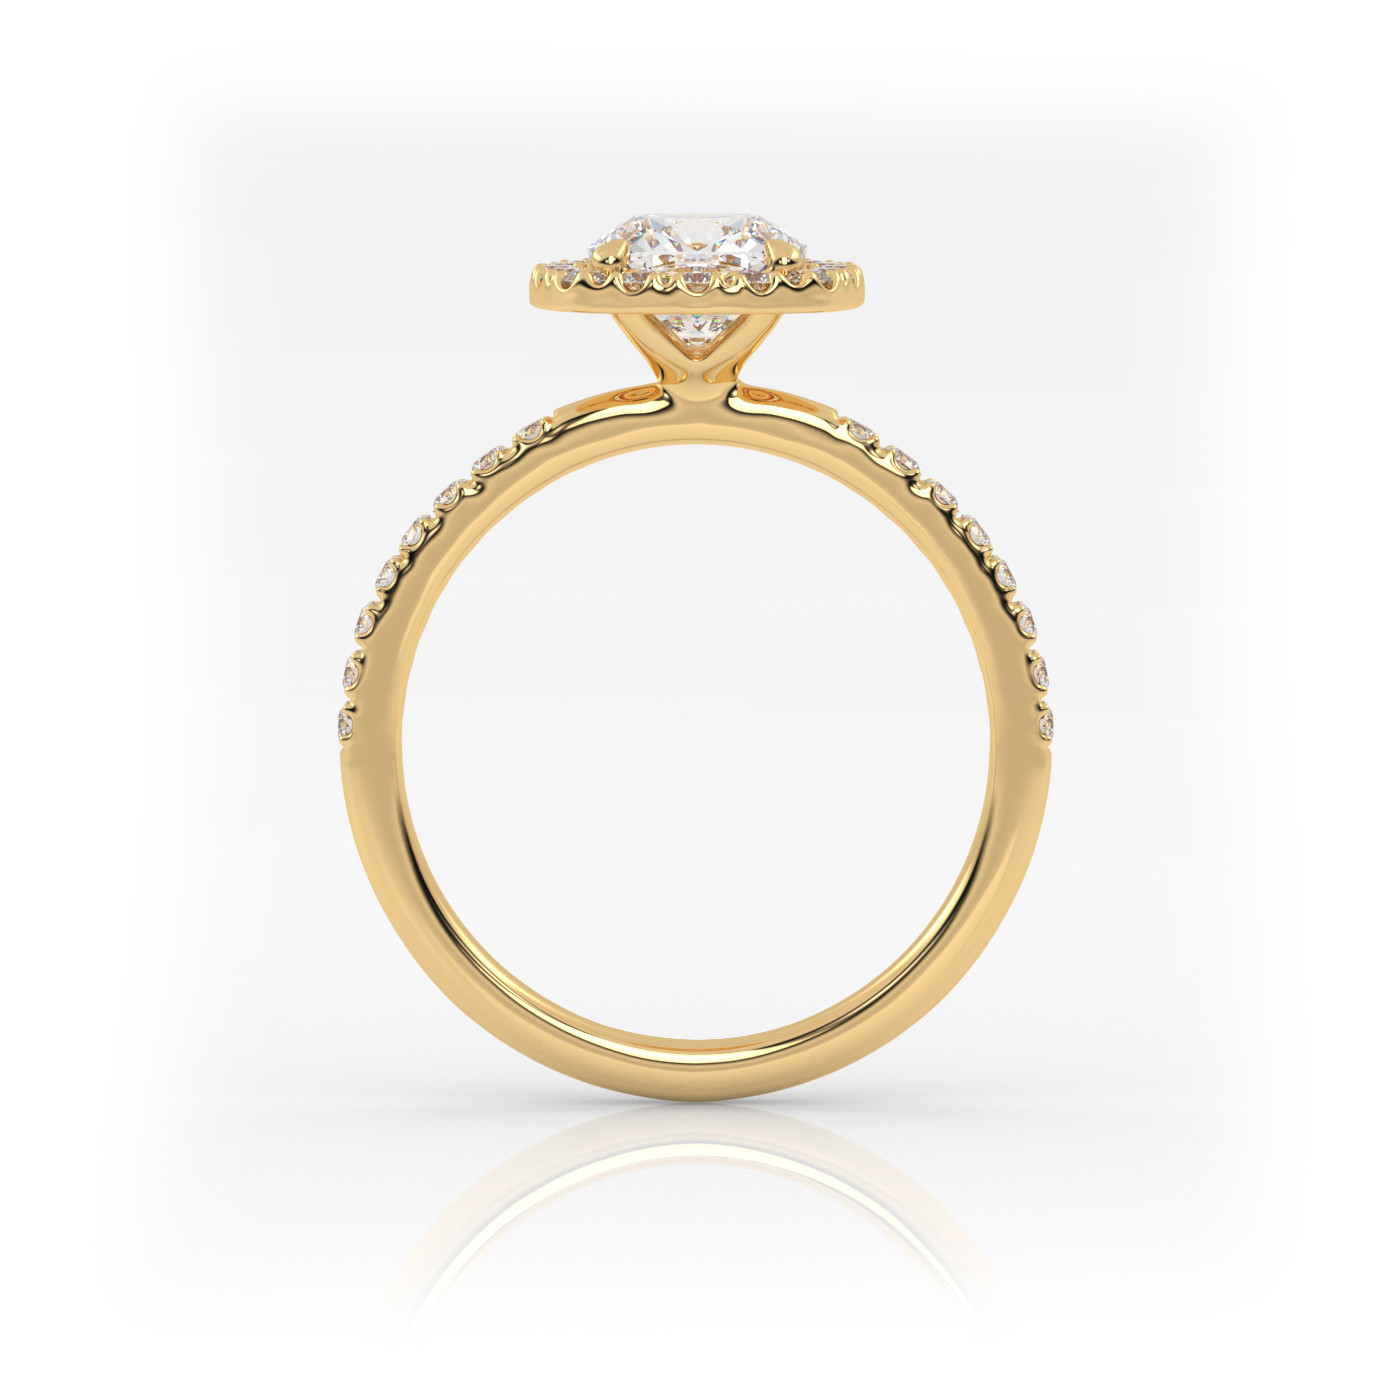 18K YELLOW GOLD Cushion Diamond Engagement Ring With Pave and Halo Style